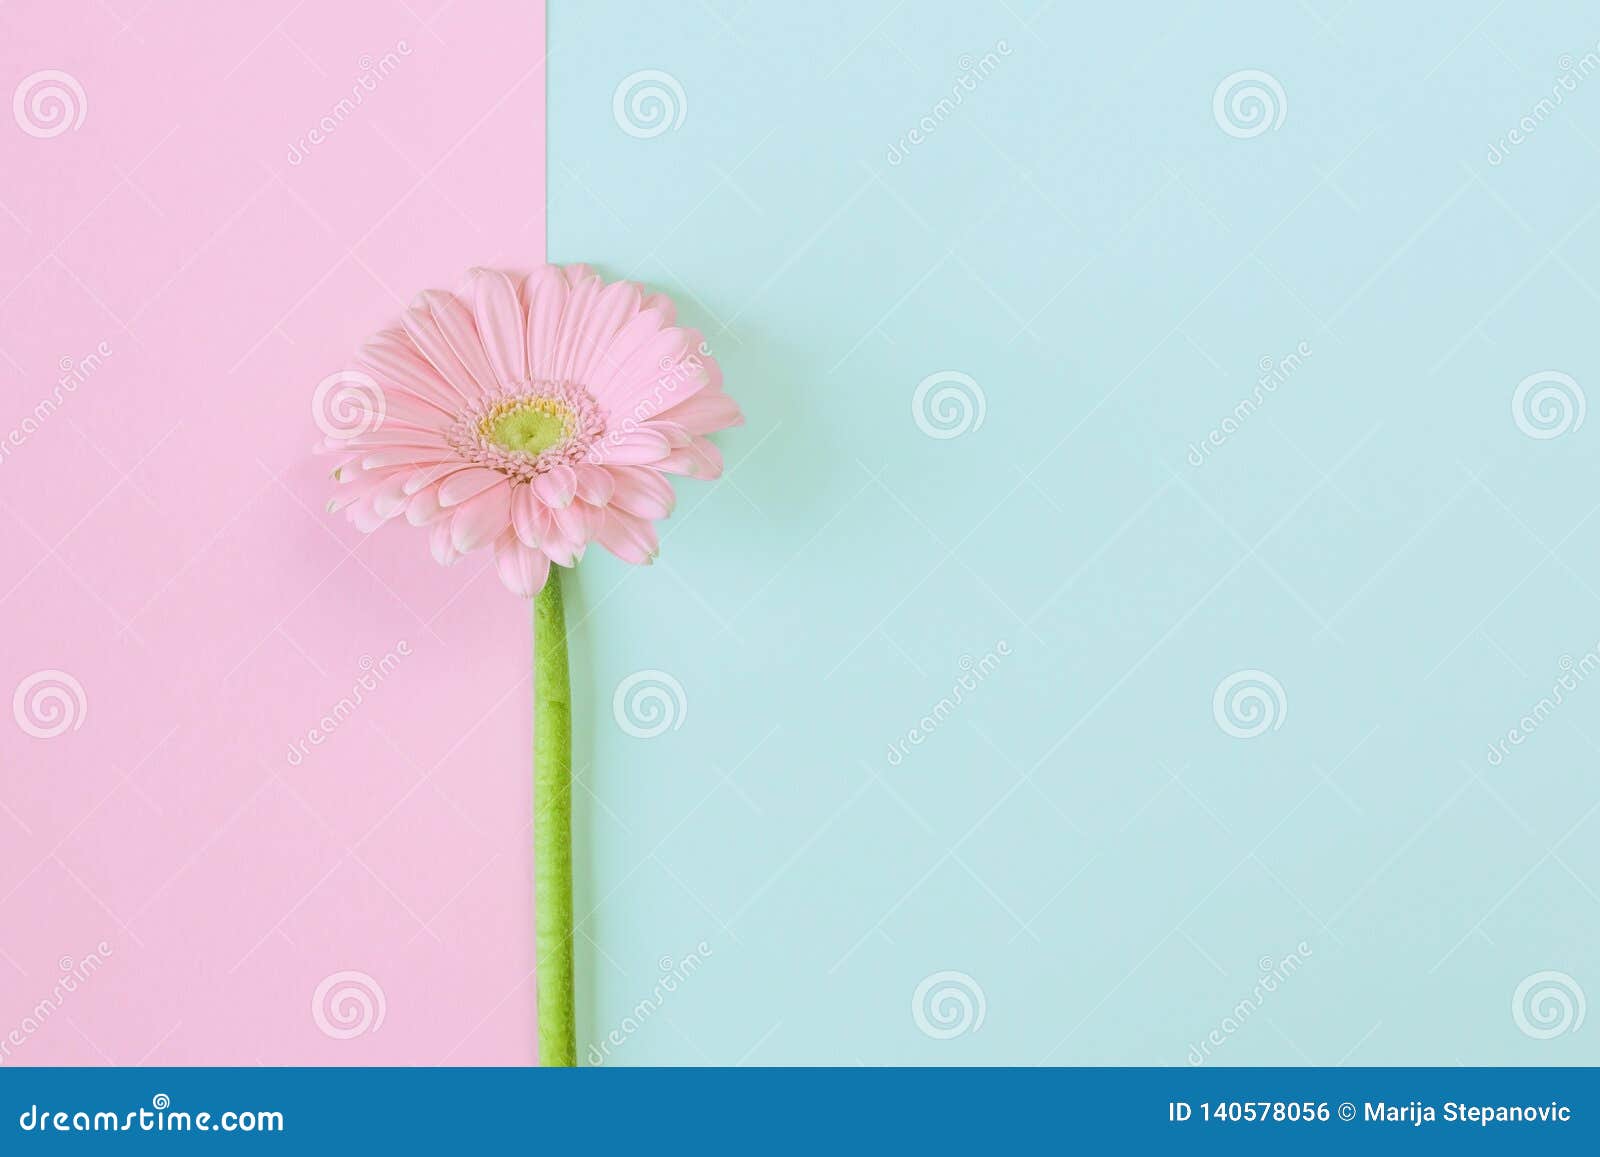 Gerbera Daisy Flower on Pastel Background. Creative Spring Composition ...